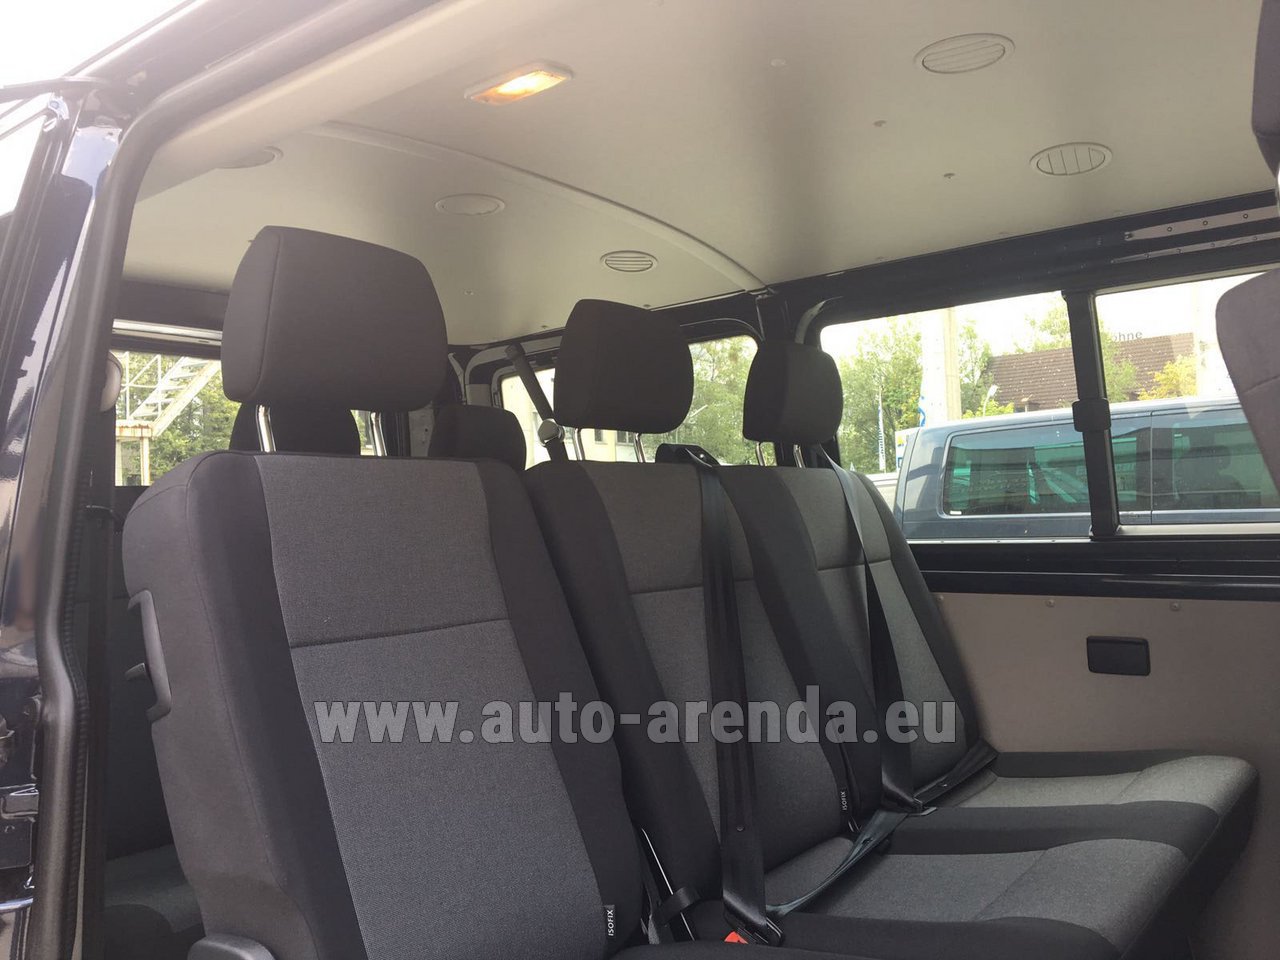 vw t6 9 seater